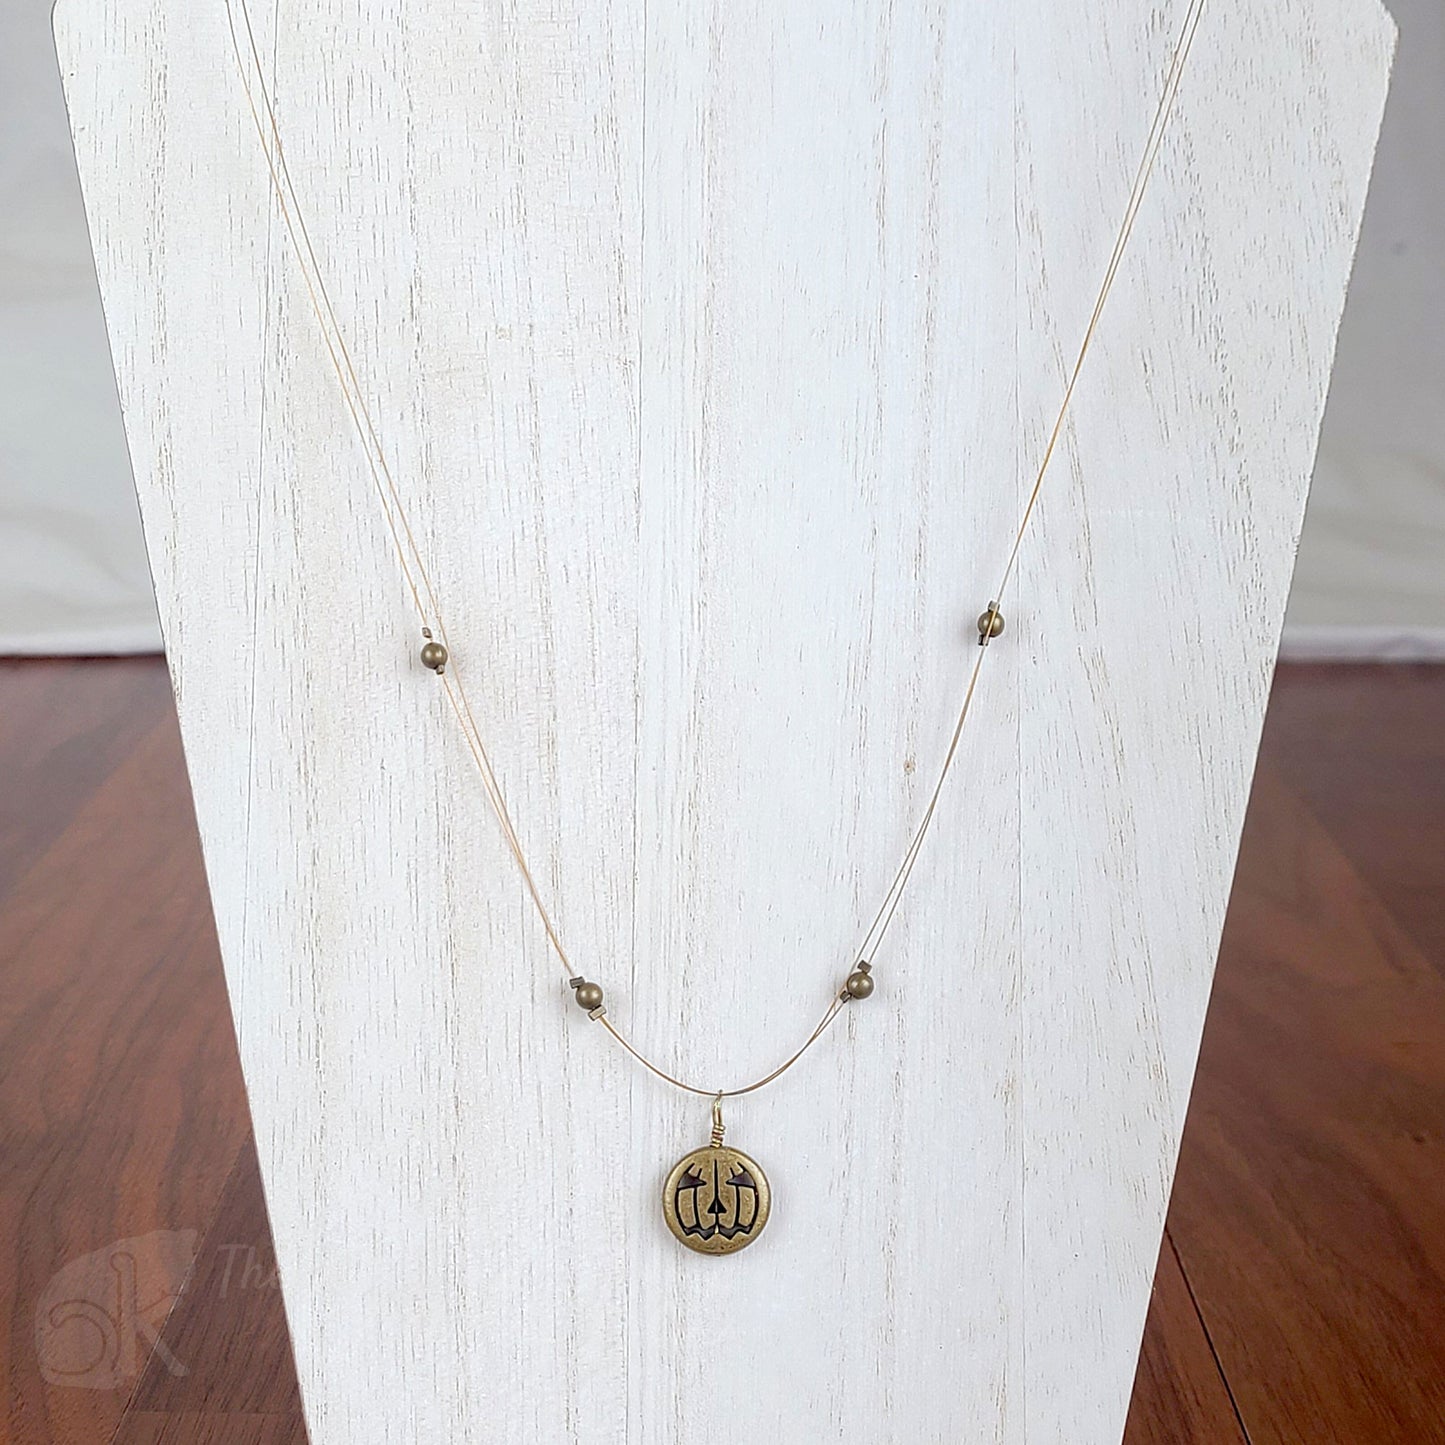 Tigertail necklace with simple round beads and jack o'lantern charms in antique gold